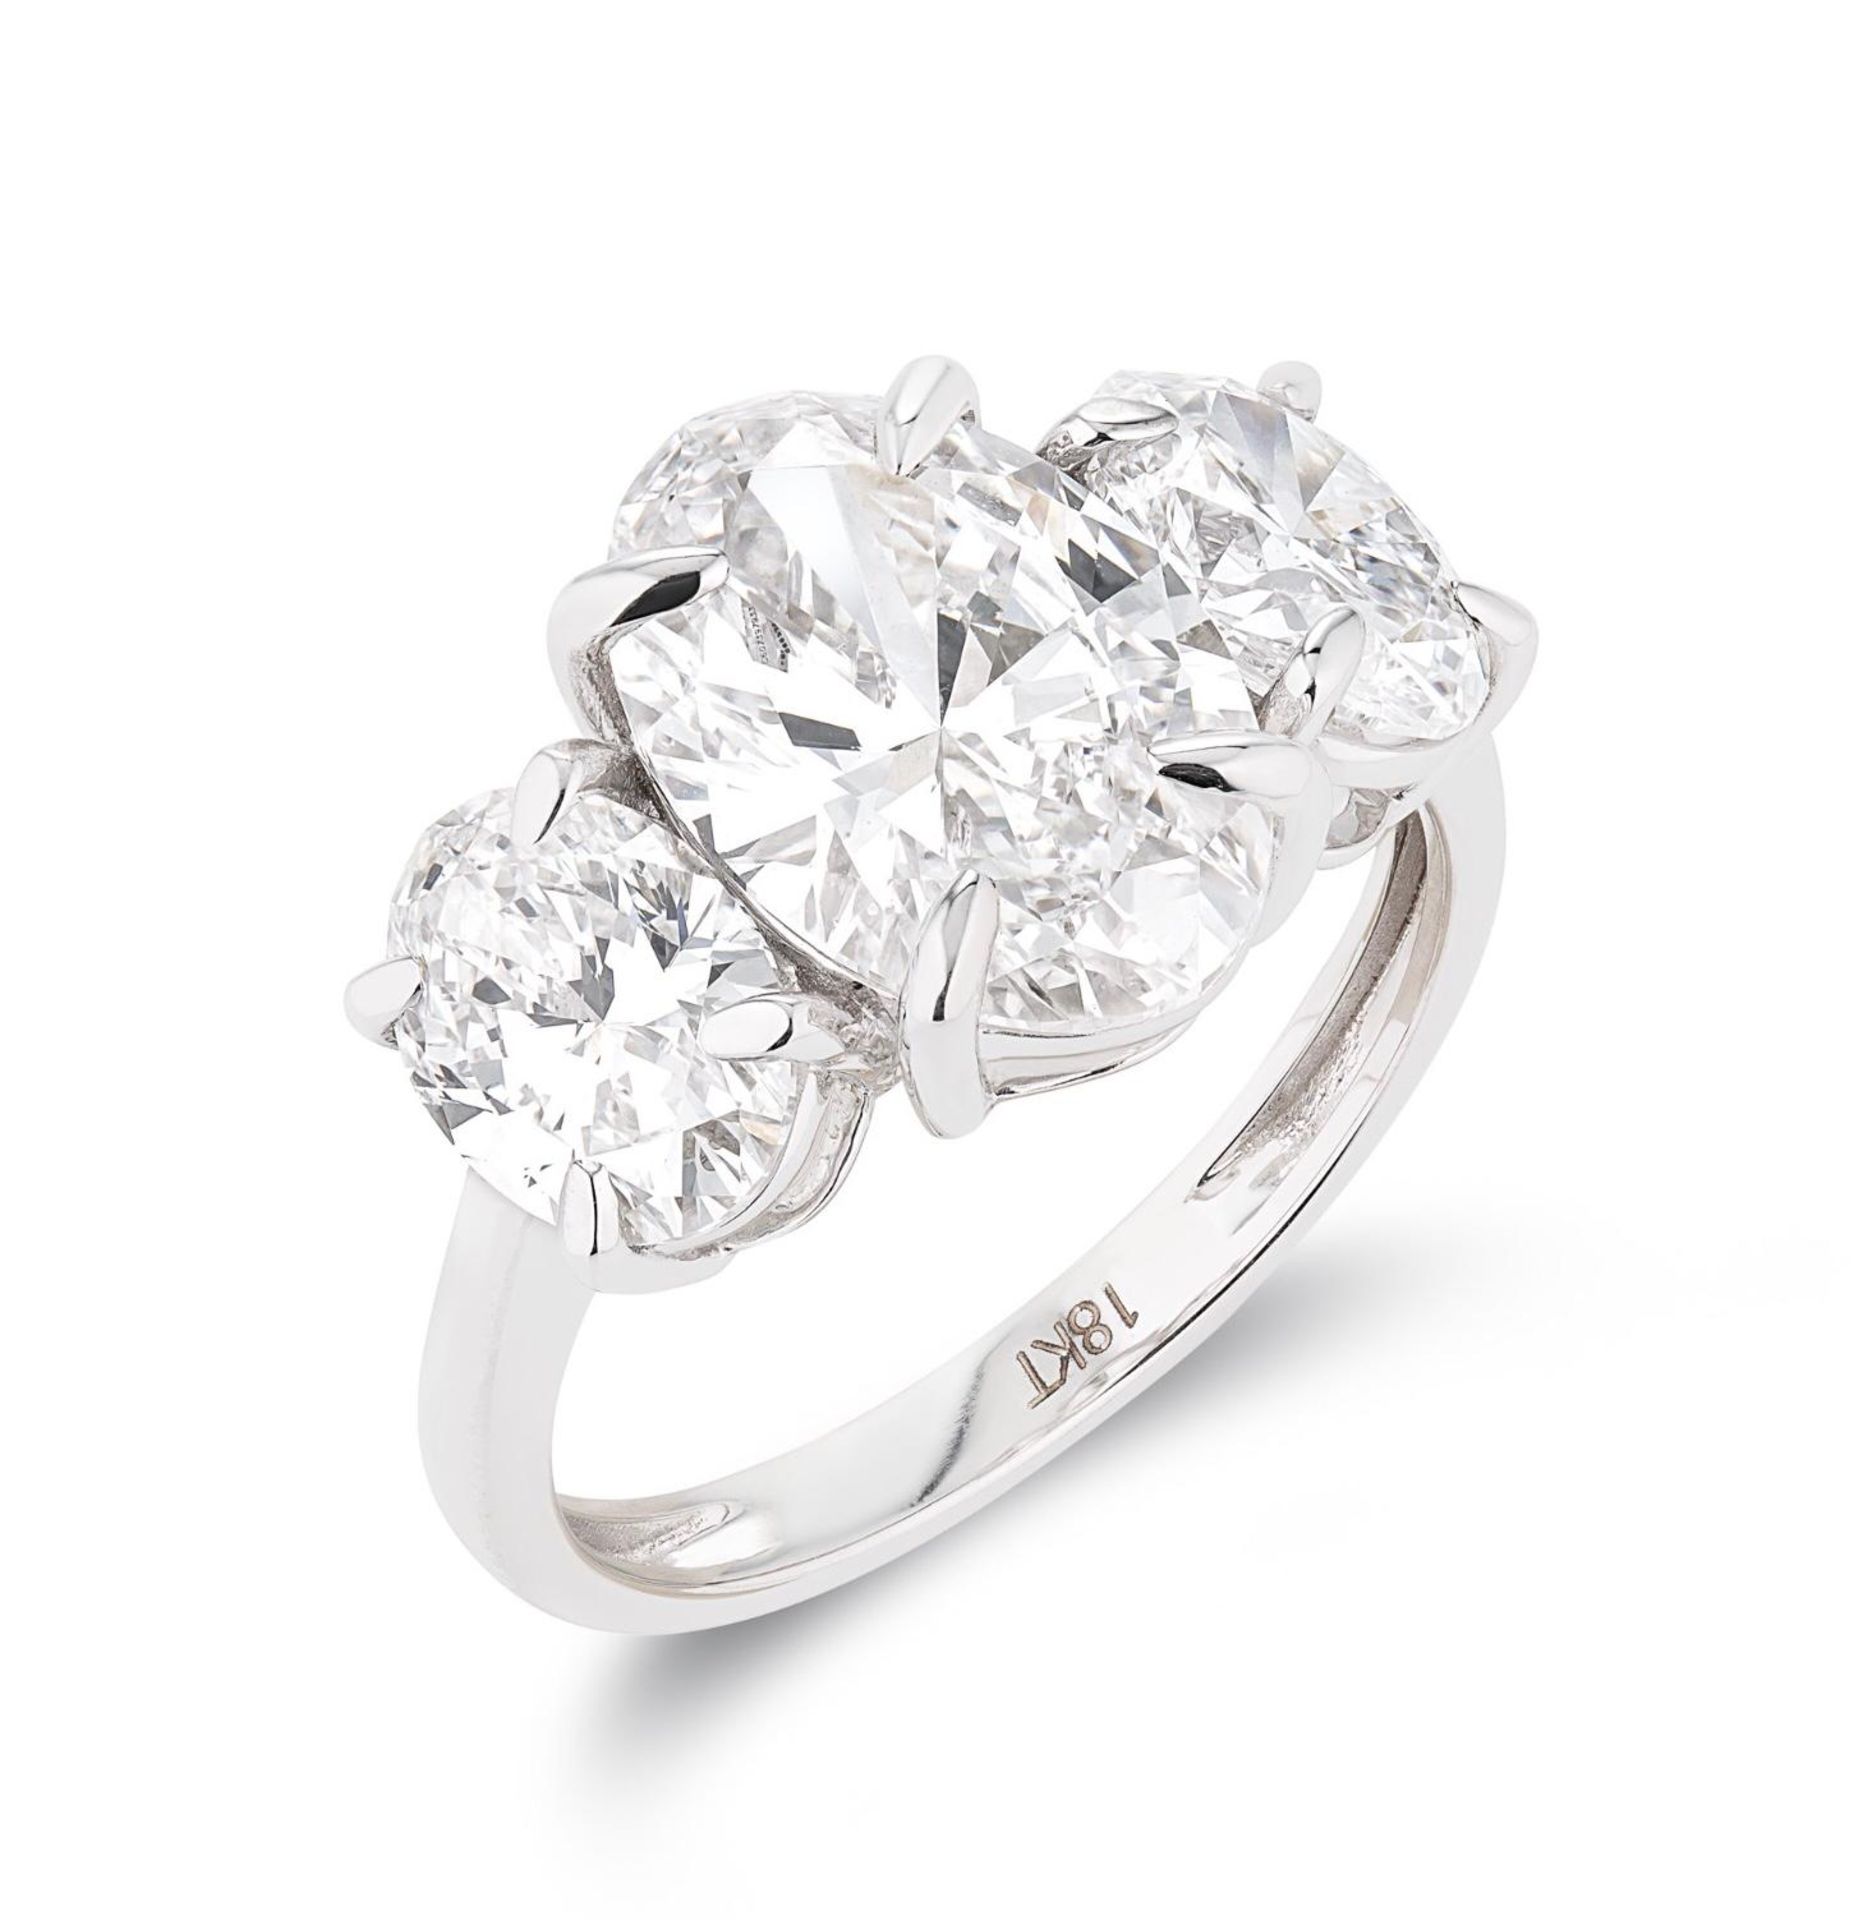 ** ON SALE ** Oval Brilliant Cut 5.07ct Trilogy Ring F Colour VS1 Clarity -Set 18KT White Gold